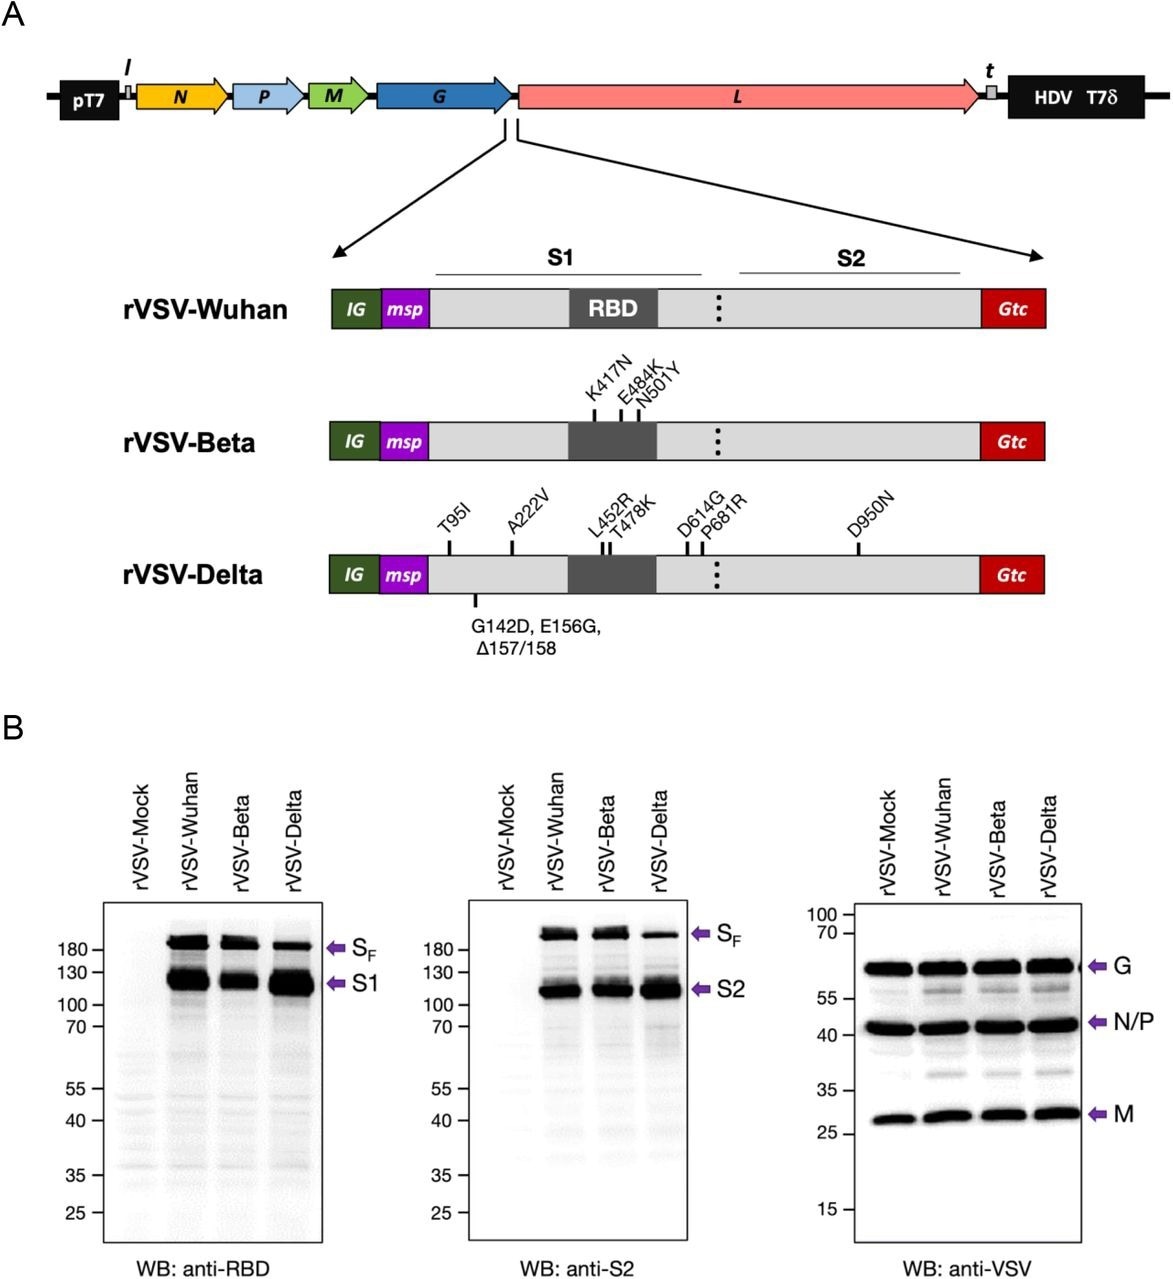 Construction of recombinant rVSV with SF genes of SARS-CoV-2 Wuhan, Beta, and Delta. (A) Constructs of VSV-SARS-CoV-2 Wuhan (rVSV-Wuhan), Beta (rVSV-Beta), and Delta (rVSV-Delta). Codon-optimized full-length Spike protein gene (SF) with VSV intergenic sequences (IG), 21 amino acid honeybee melittin signal peptide (msp), and 49 amino acid VSV G protein transmembrane domain and cytoplasmic tail (Gtc) were inserted into the G and L gene junction of rVSVInd. (B) Expression of SARS-CoV-2 Spike proteins in BHK-21 cells at 6 hr post-infection with rVSV-Mock (rVSV), rVSV-Wuhan, rVSV-Beta, and rVSV-Delta. pT7: Bacteriophage T7 promoter for DNA dependent RNA polymerase. N: VSV Nucleocapsid protein gene. P: VSV Phosphoprotein gene. M: VSV Matrix protein gene. G: VSV Glycoprotein gene. L: VSV Large protein, RNA dependent RNA polymerase gene. l: Leader region in the 3’ s-end of the VSV genome. t: Trailer region in the 5’-end of the VSV genome. HDV: Hepatitis delta virus ribozyme encoding sequences. T7δ: Bacteriophage T7 transcriptional terminator sequences. nt: nucleotides. aa: amino acids.